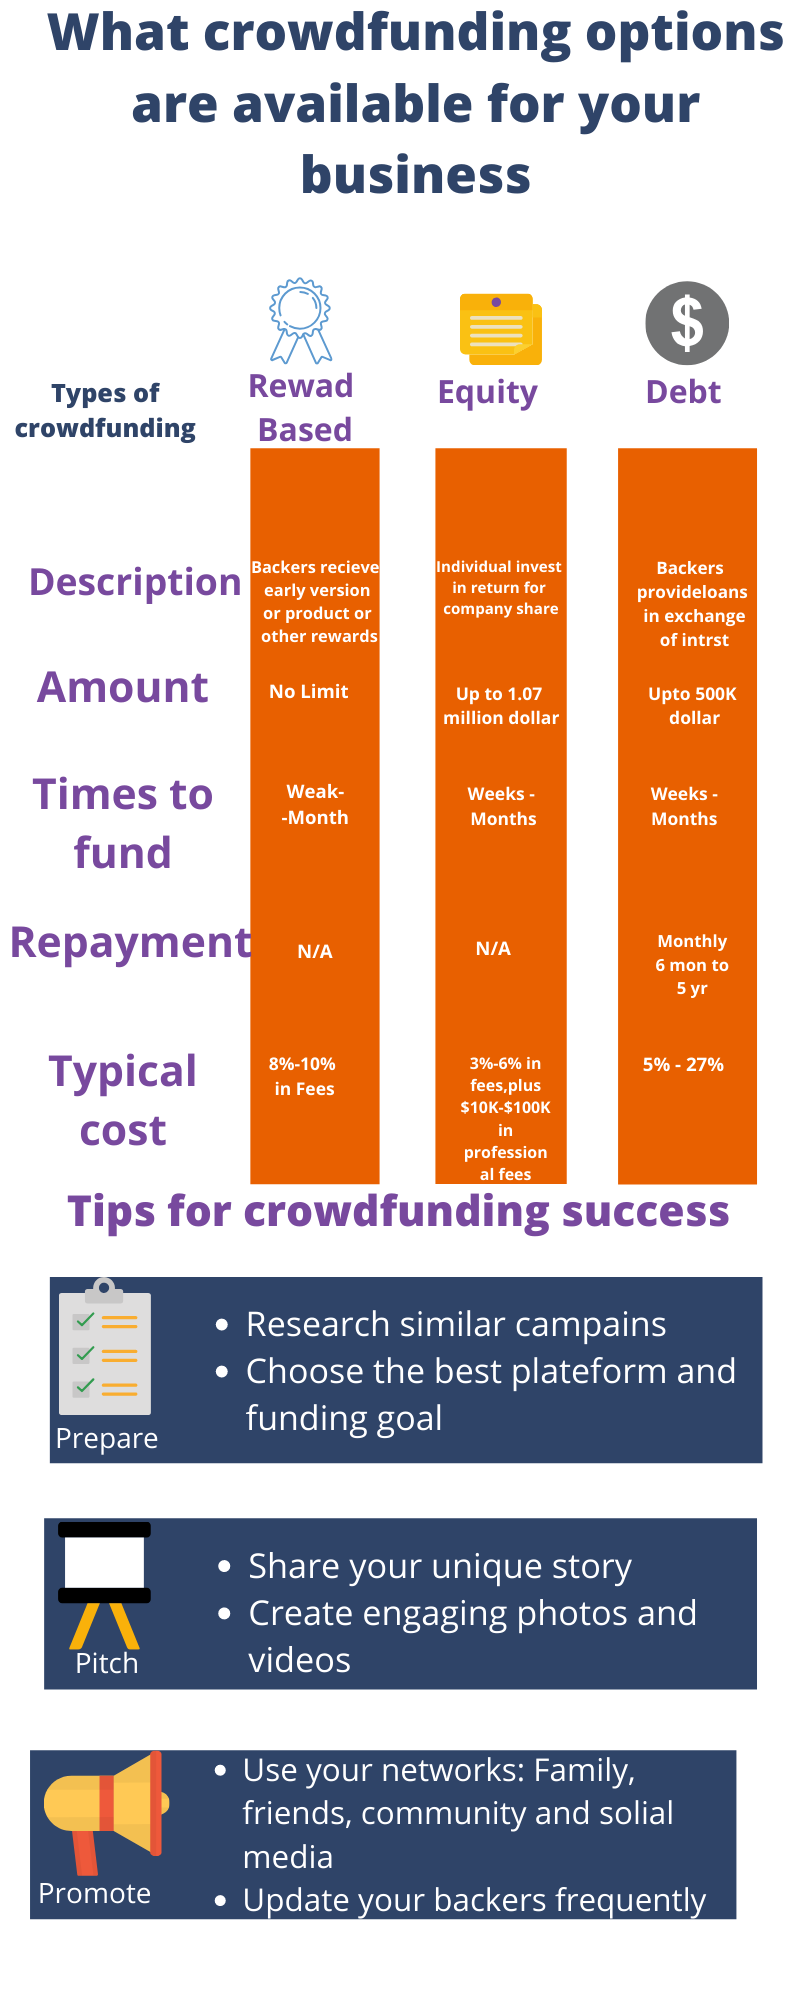 What crowd funding option are available for your business